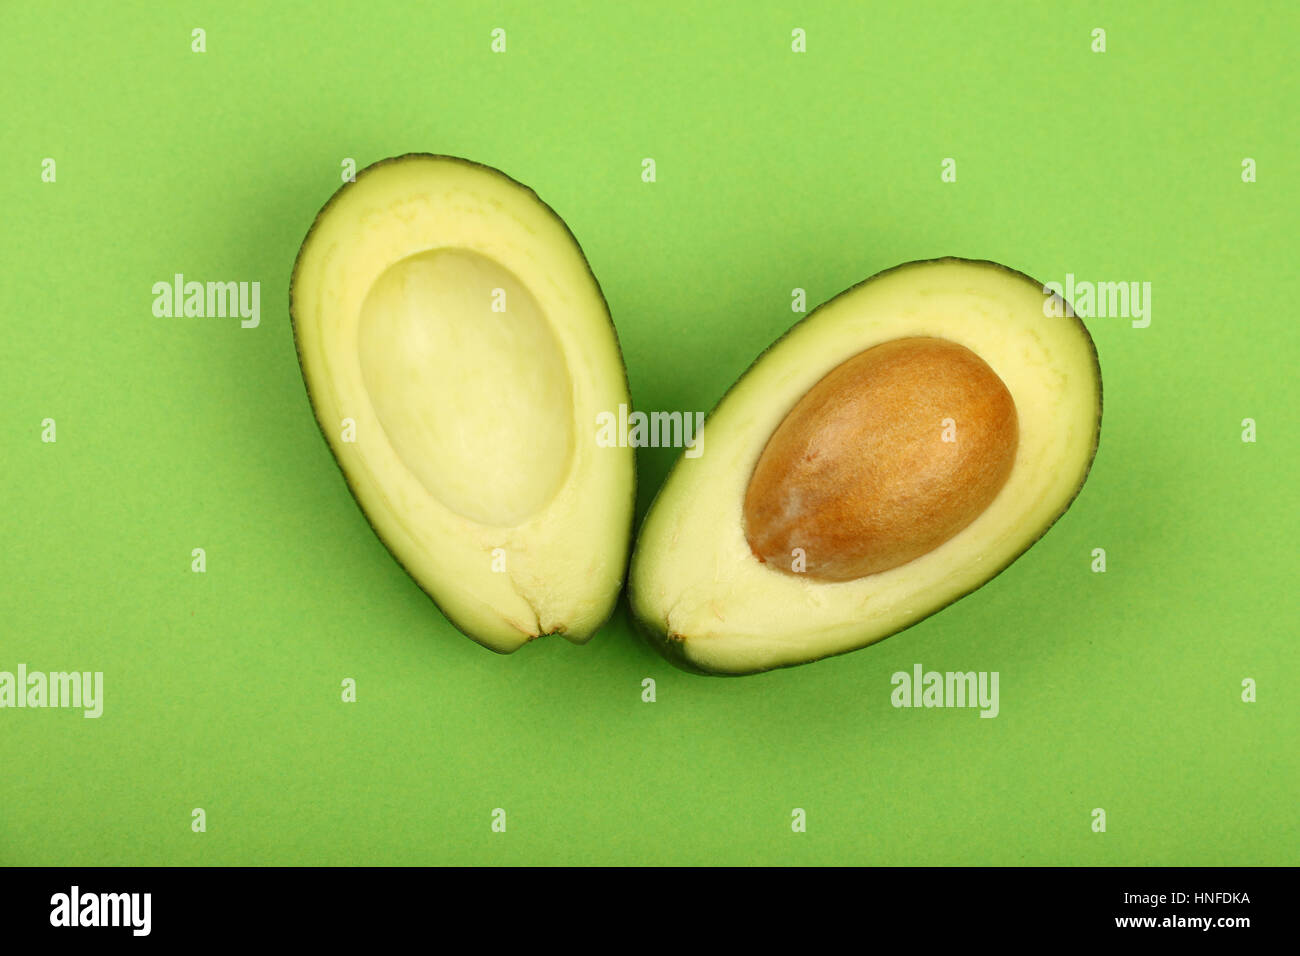 Two halves of one fresh ripe cut avocado with pit stone on green paper background, detail, close up, elevated top view Stock Photo